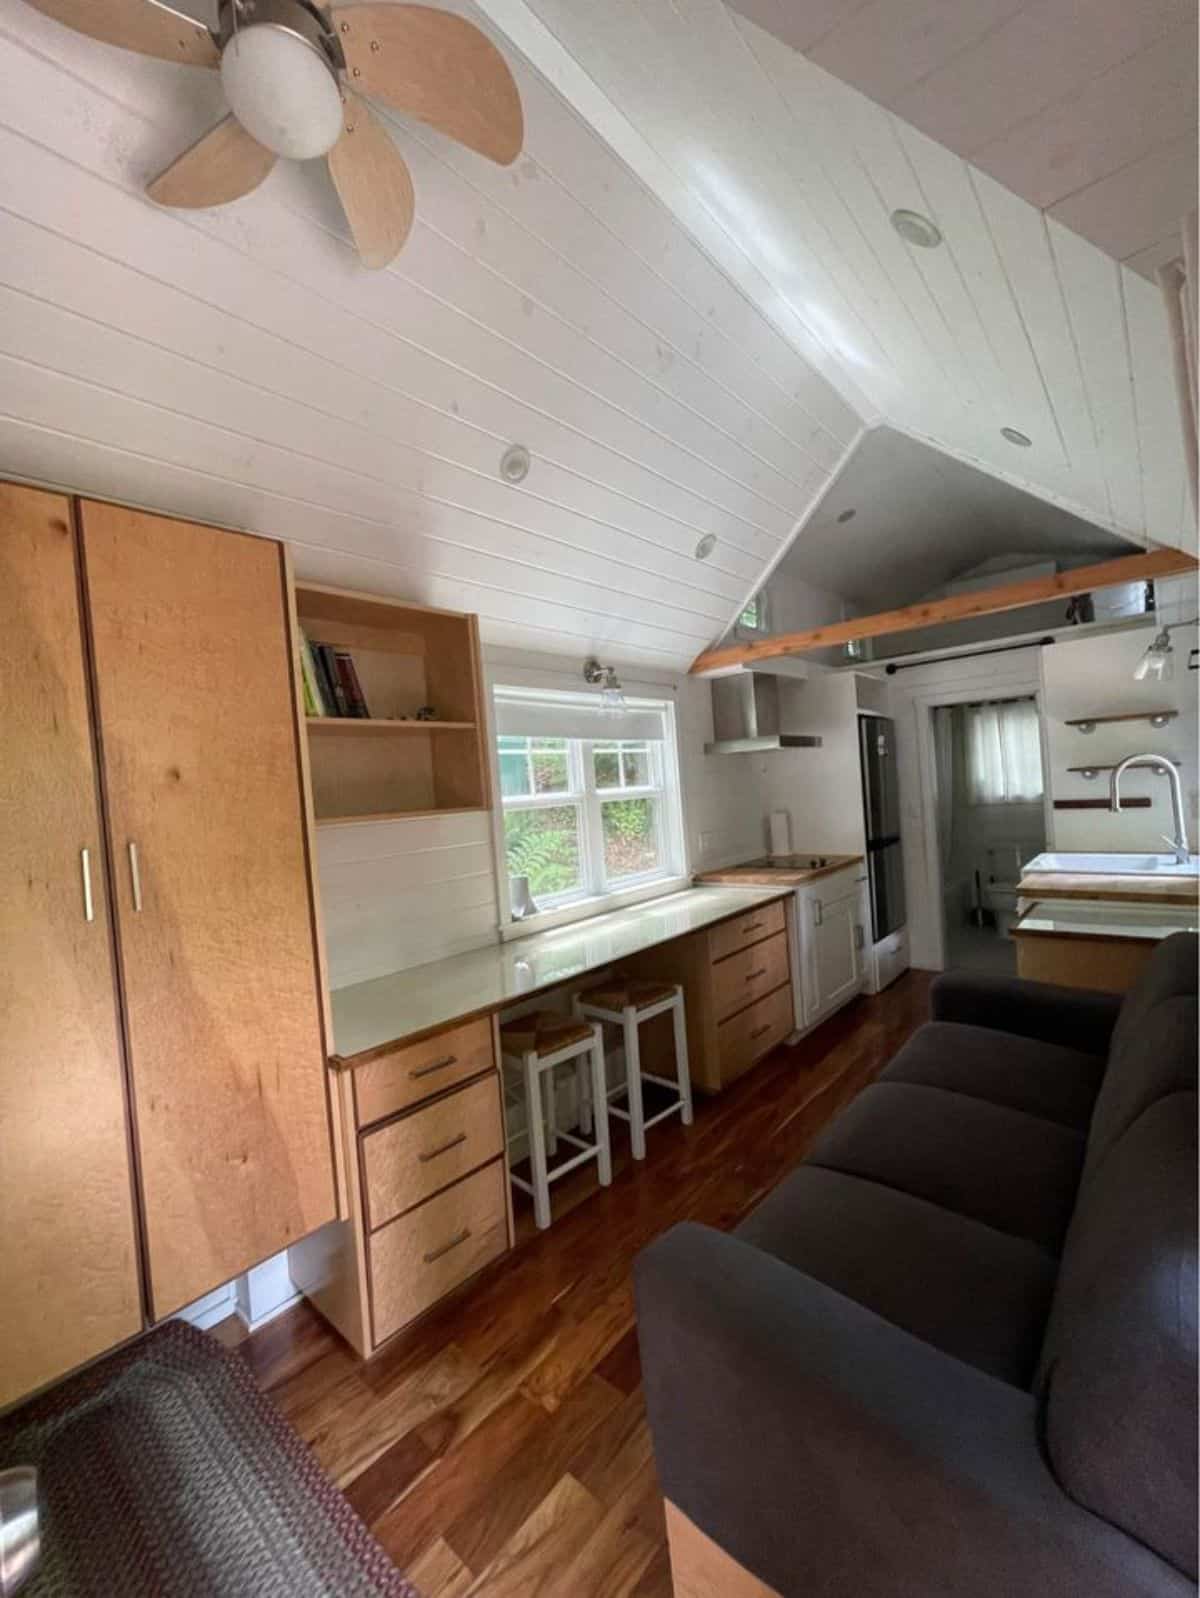 living area of tiny home with lot